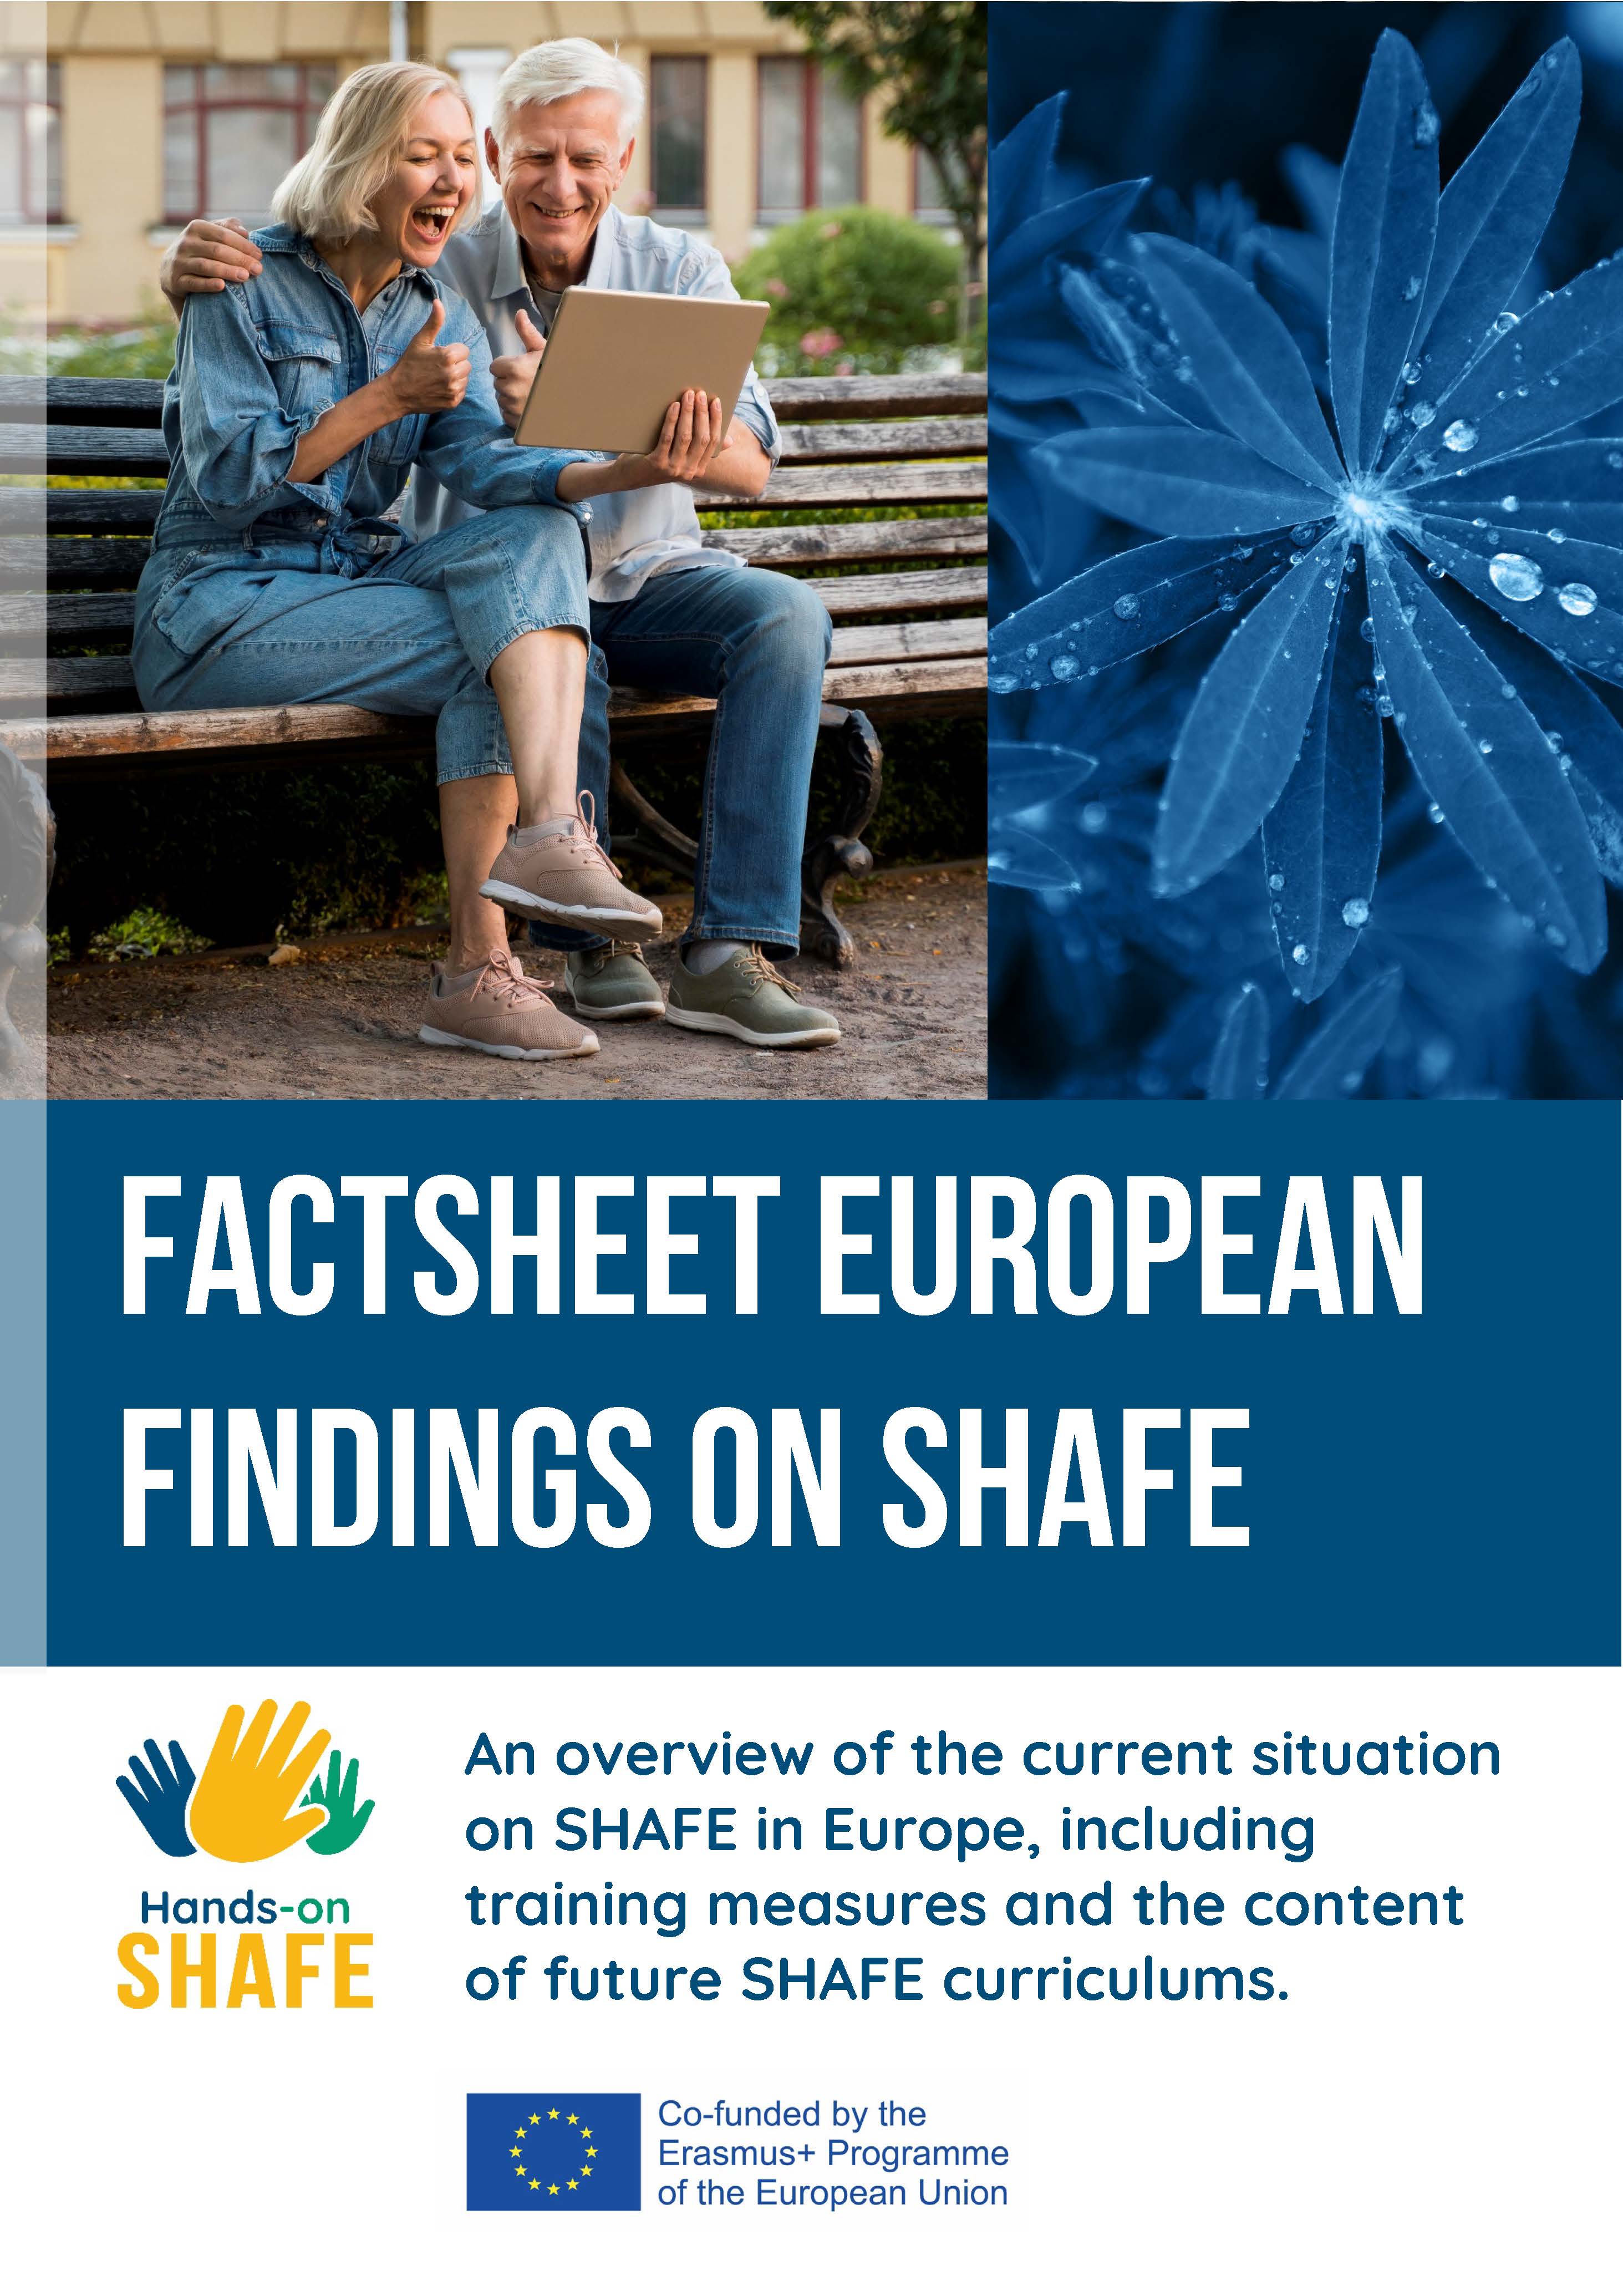 European Synthesis Report of research results on SHAFE